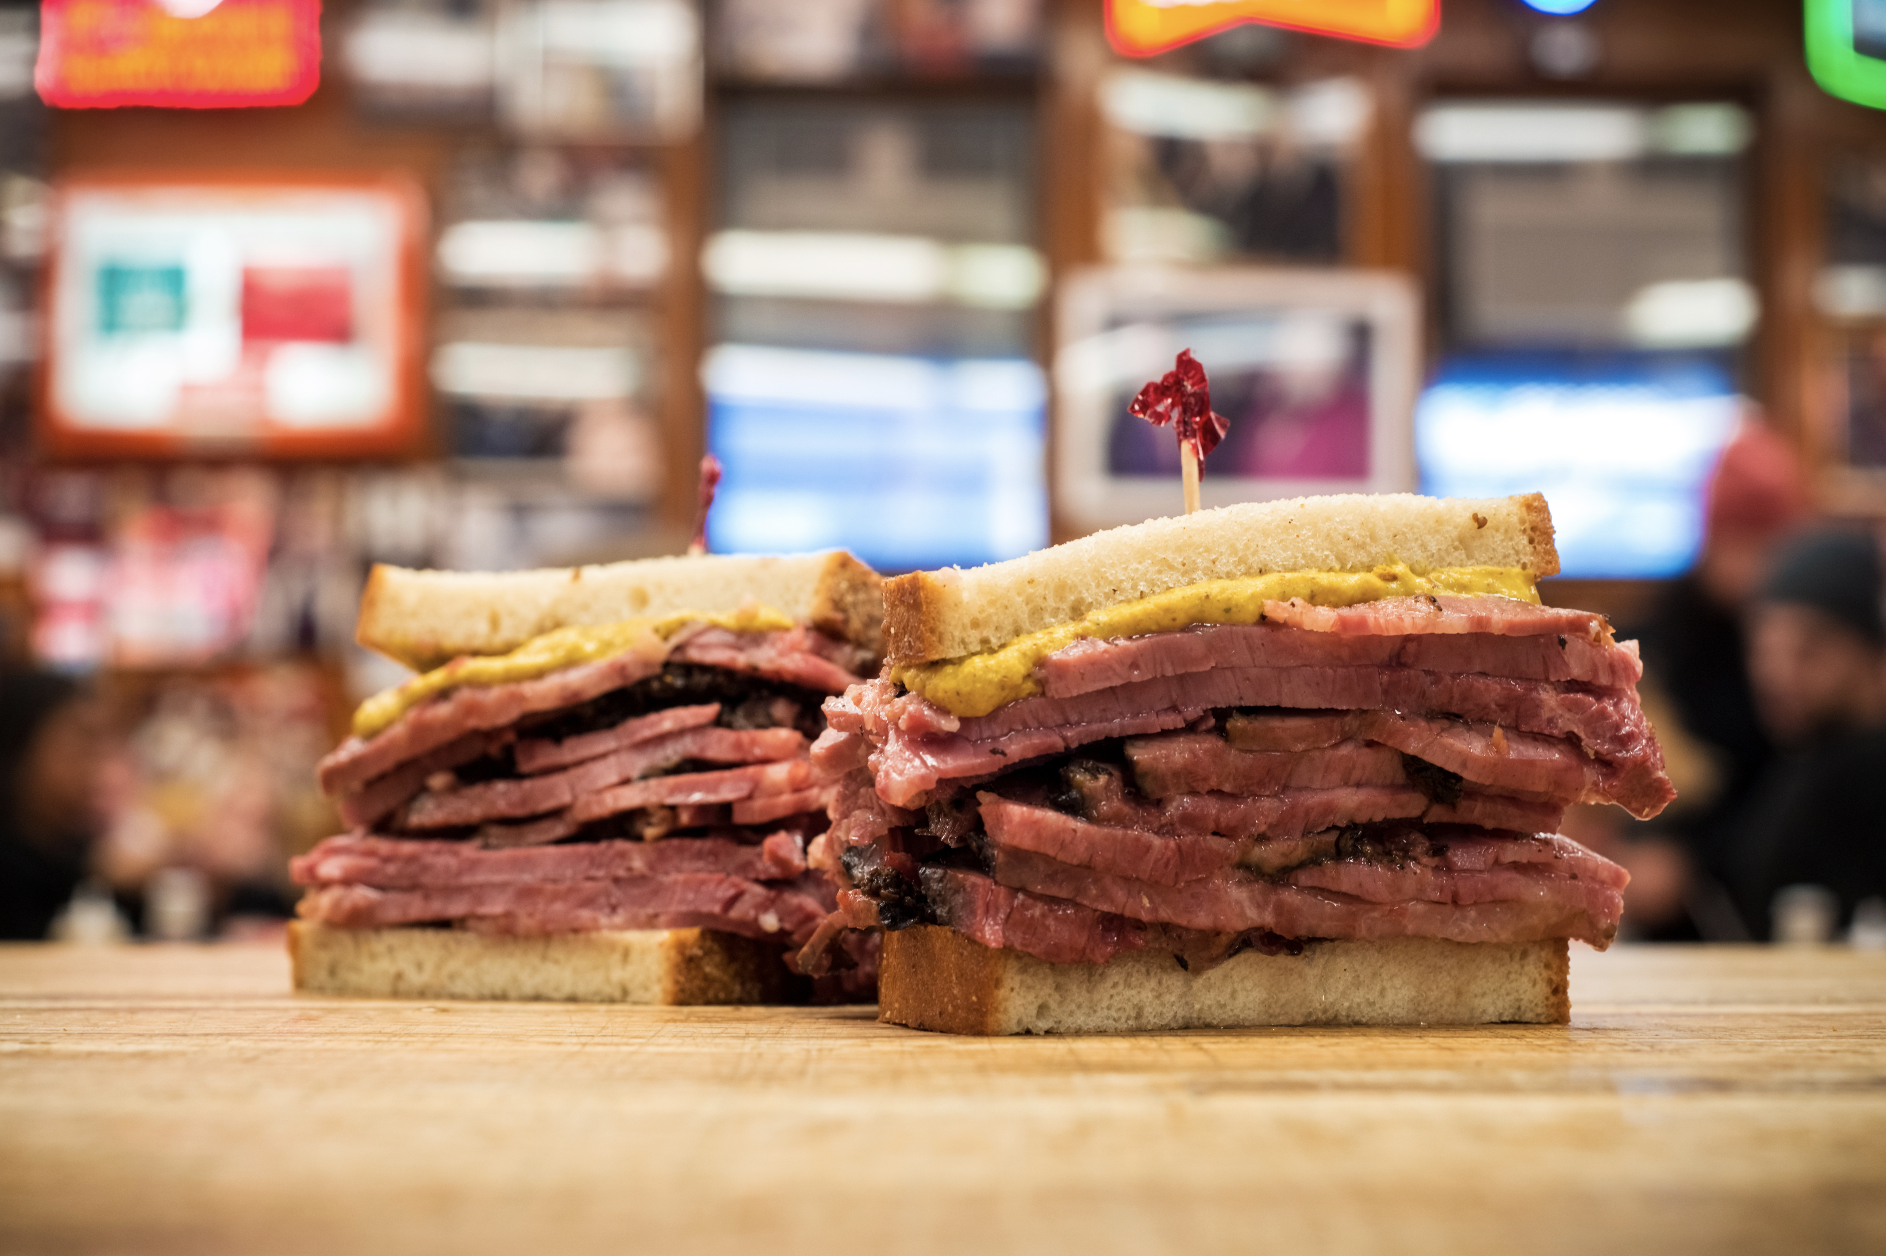 The famous New York diner Katz’s opens for one day only in LA